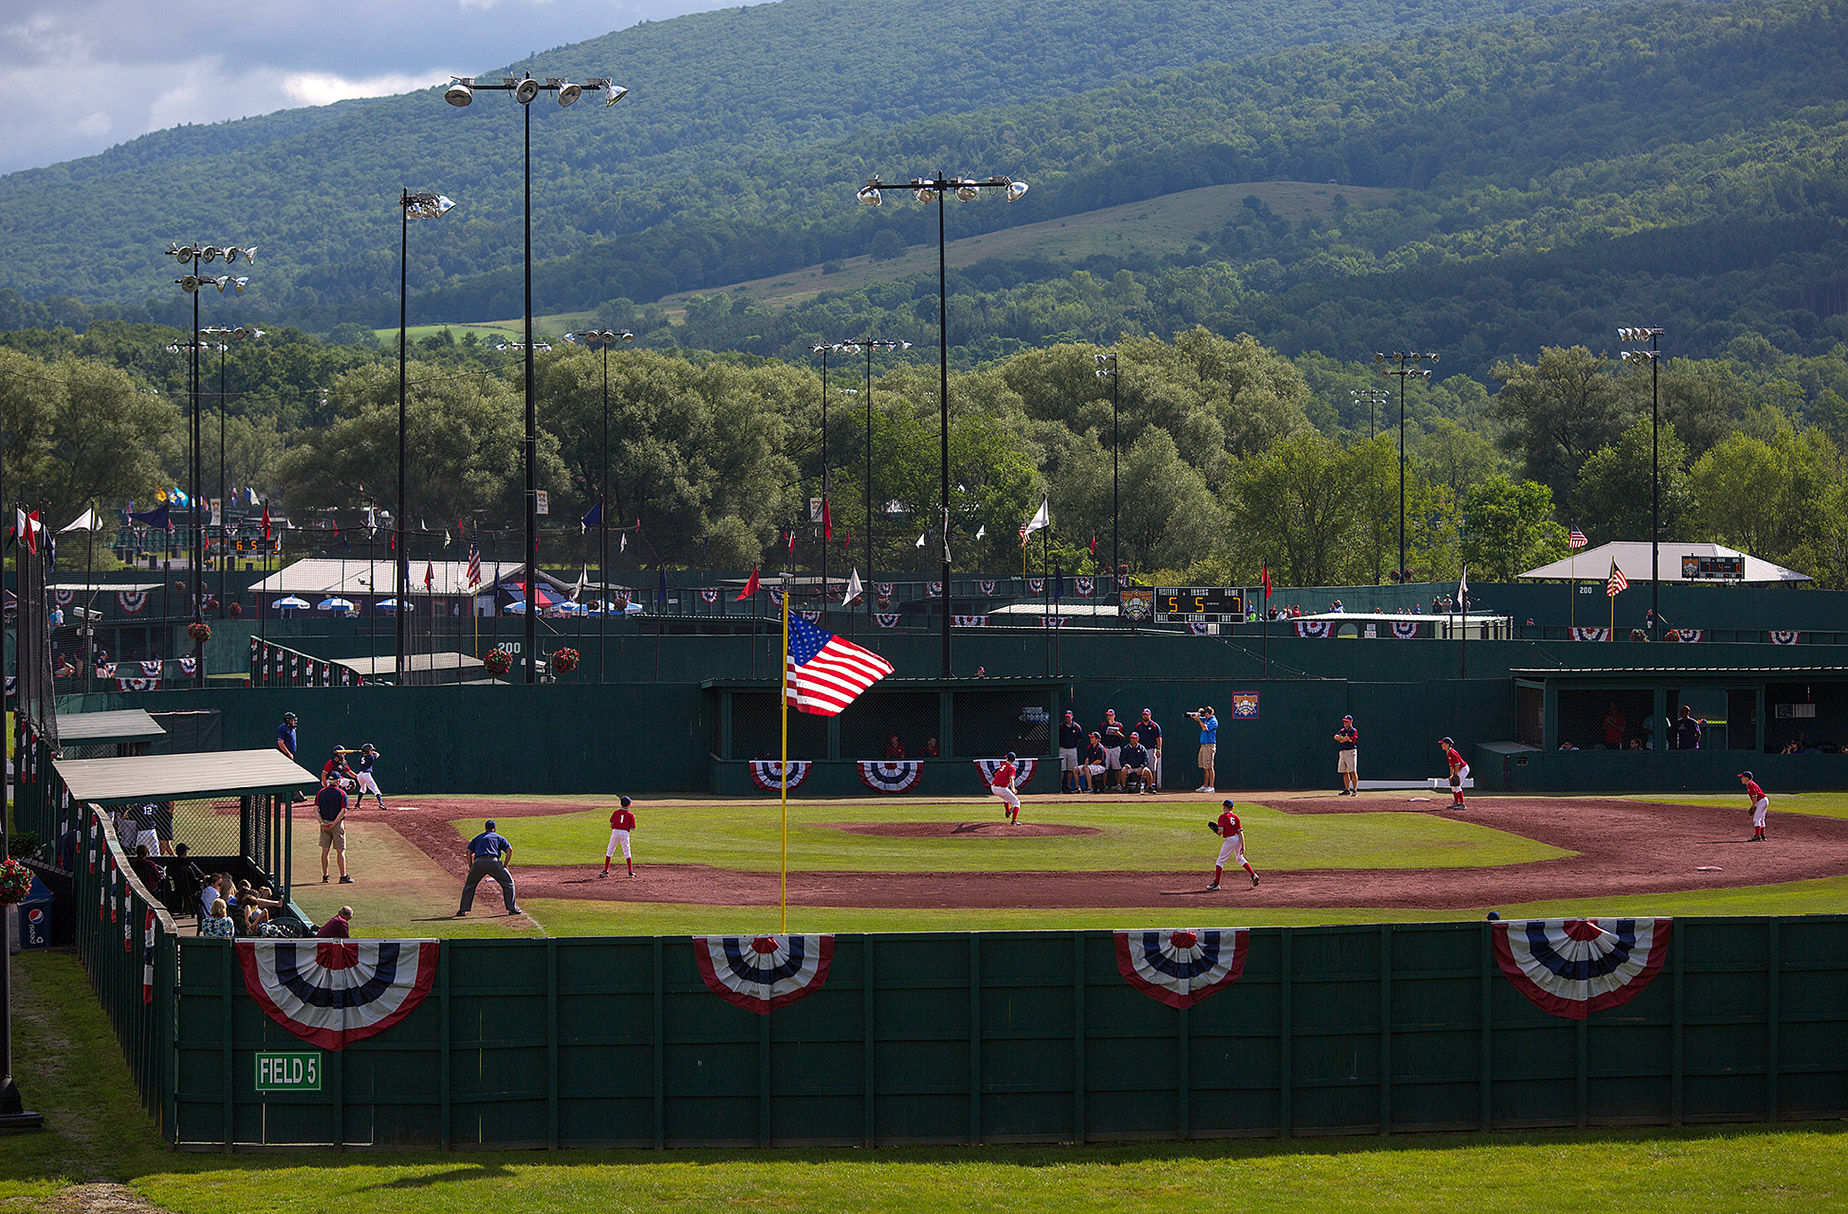 Game On Cooperstown and Dreams Park ESPN